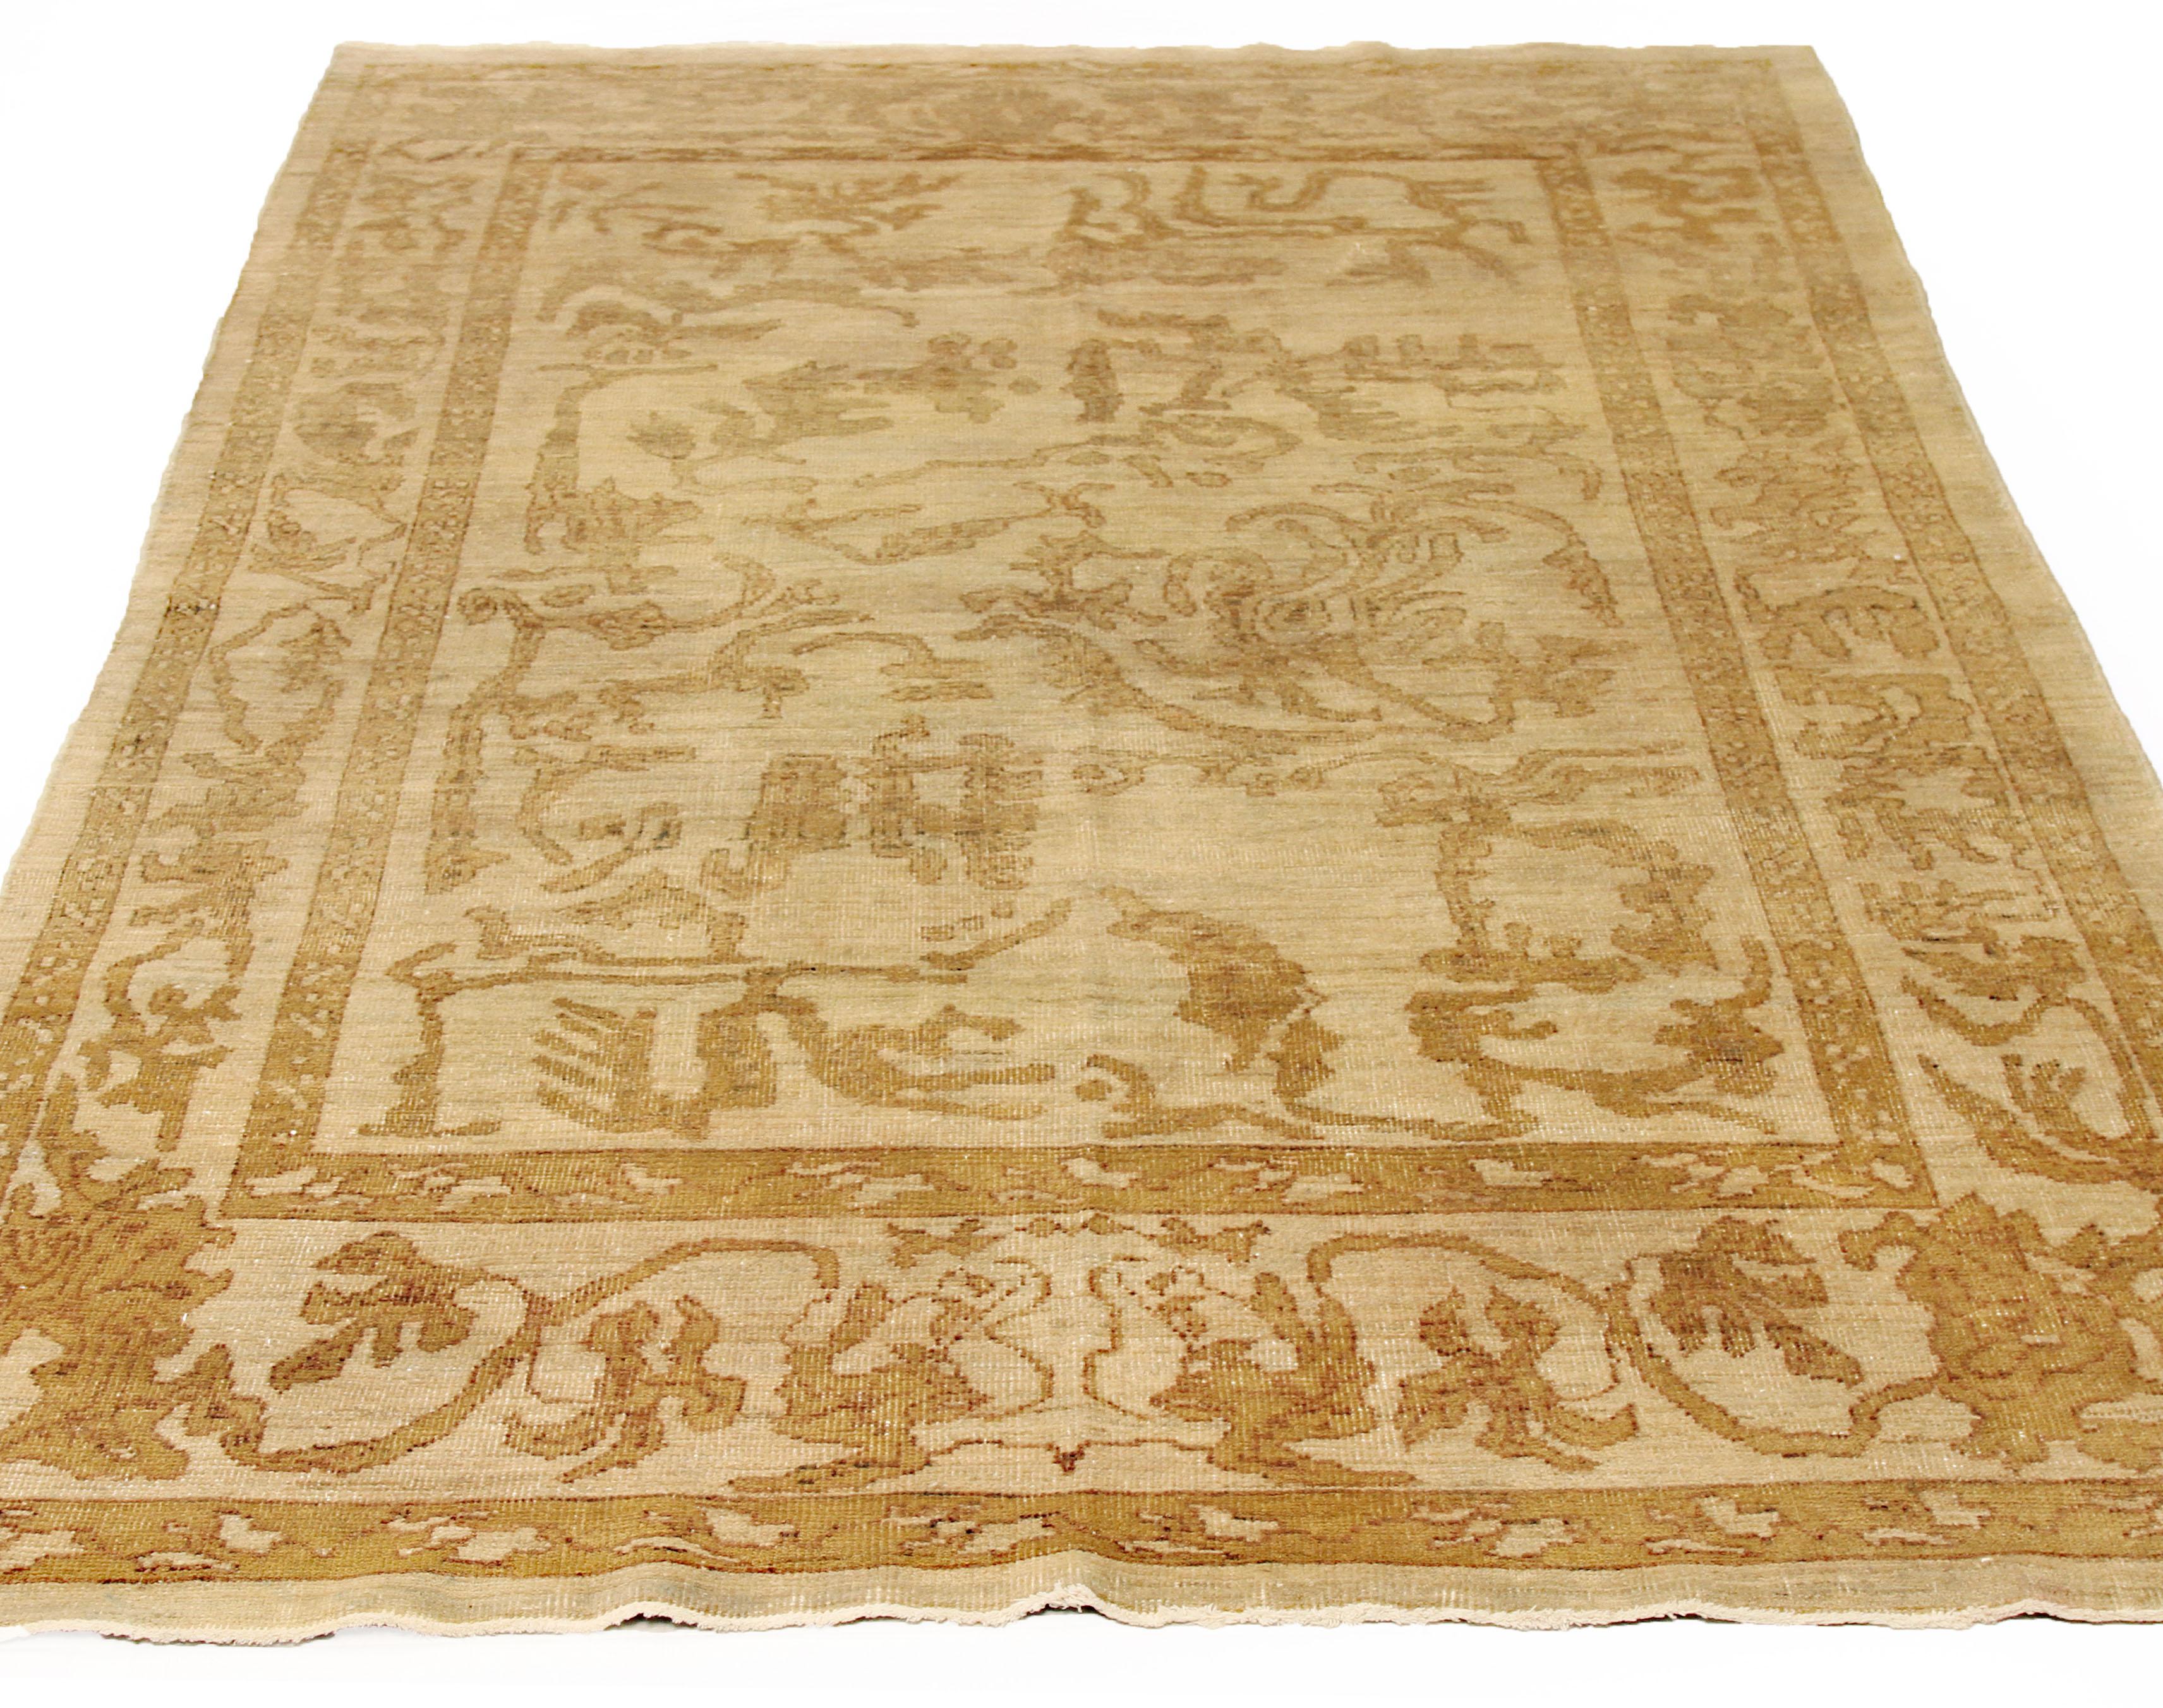 New handmade Turkish area rug from high-quality sheep’s wool and colored with eco-friendly vegetable dyes that are proven safe for humans and pets alike. It’s a Classic Sultanabad design showcasing a regal ivory field with prominent Herati flower